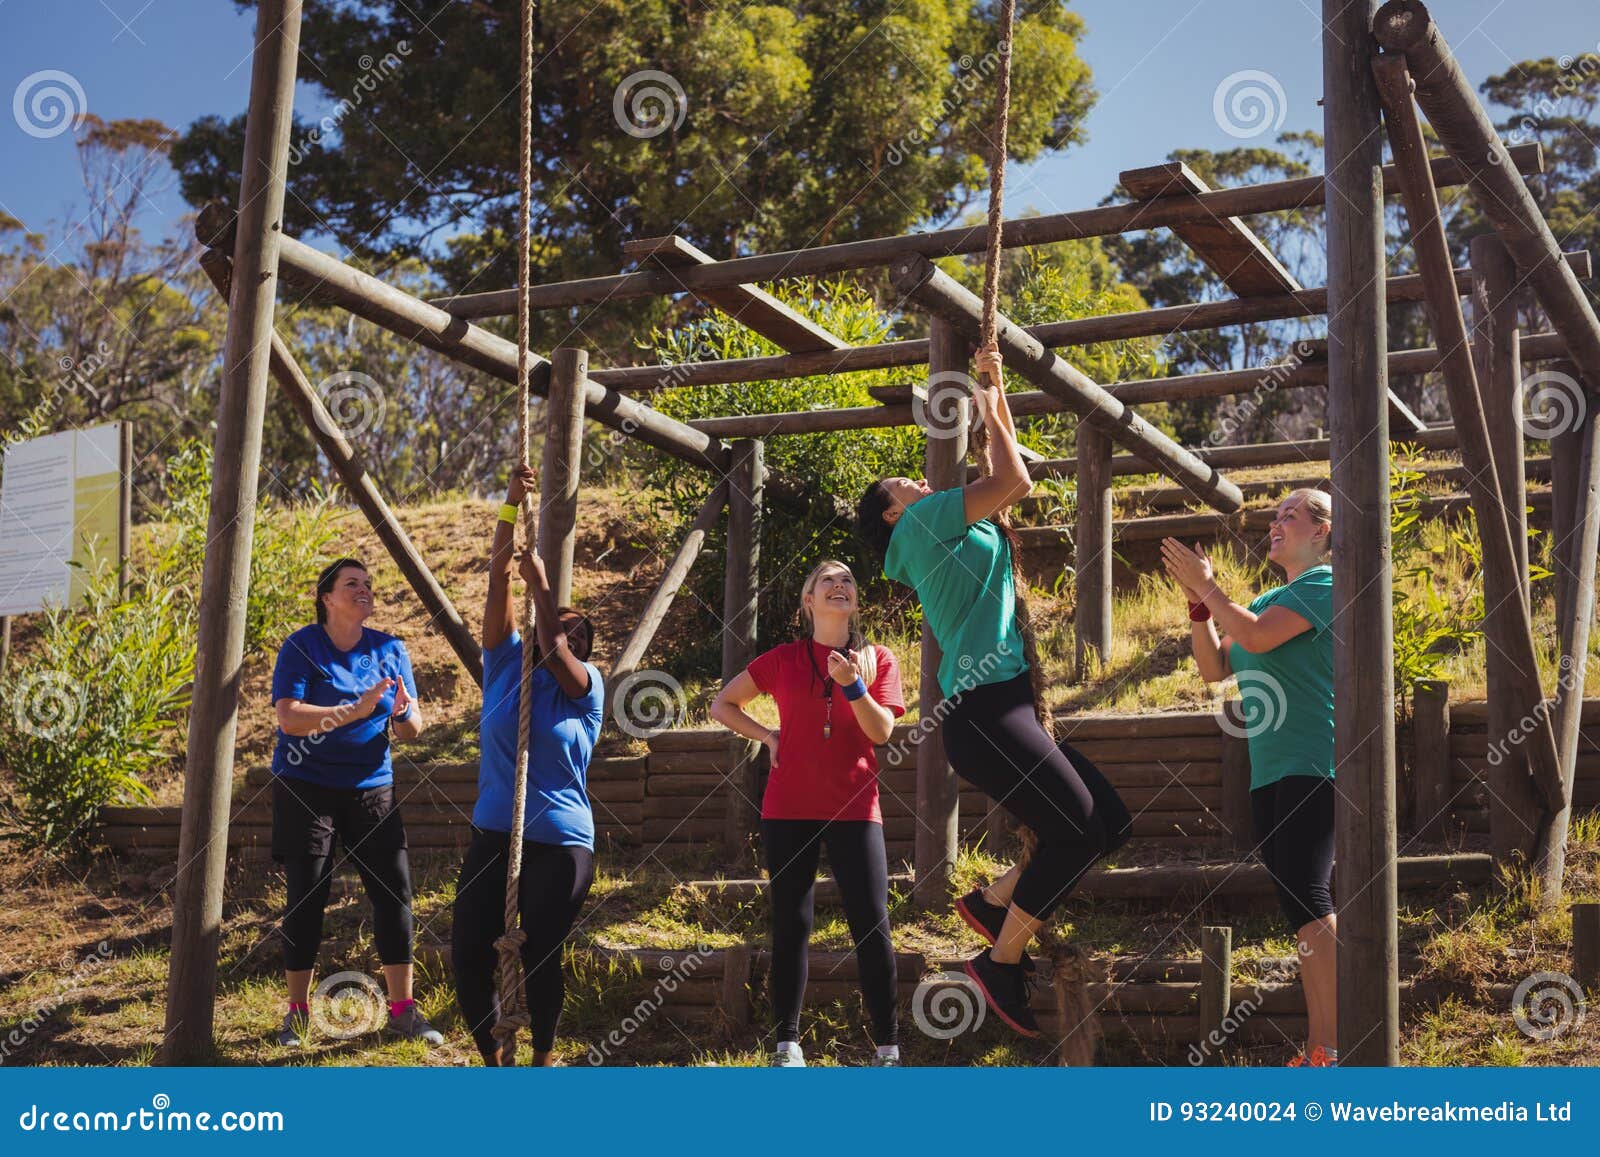 female trainer instructing women to climb a rope in the boot camp